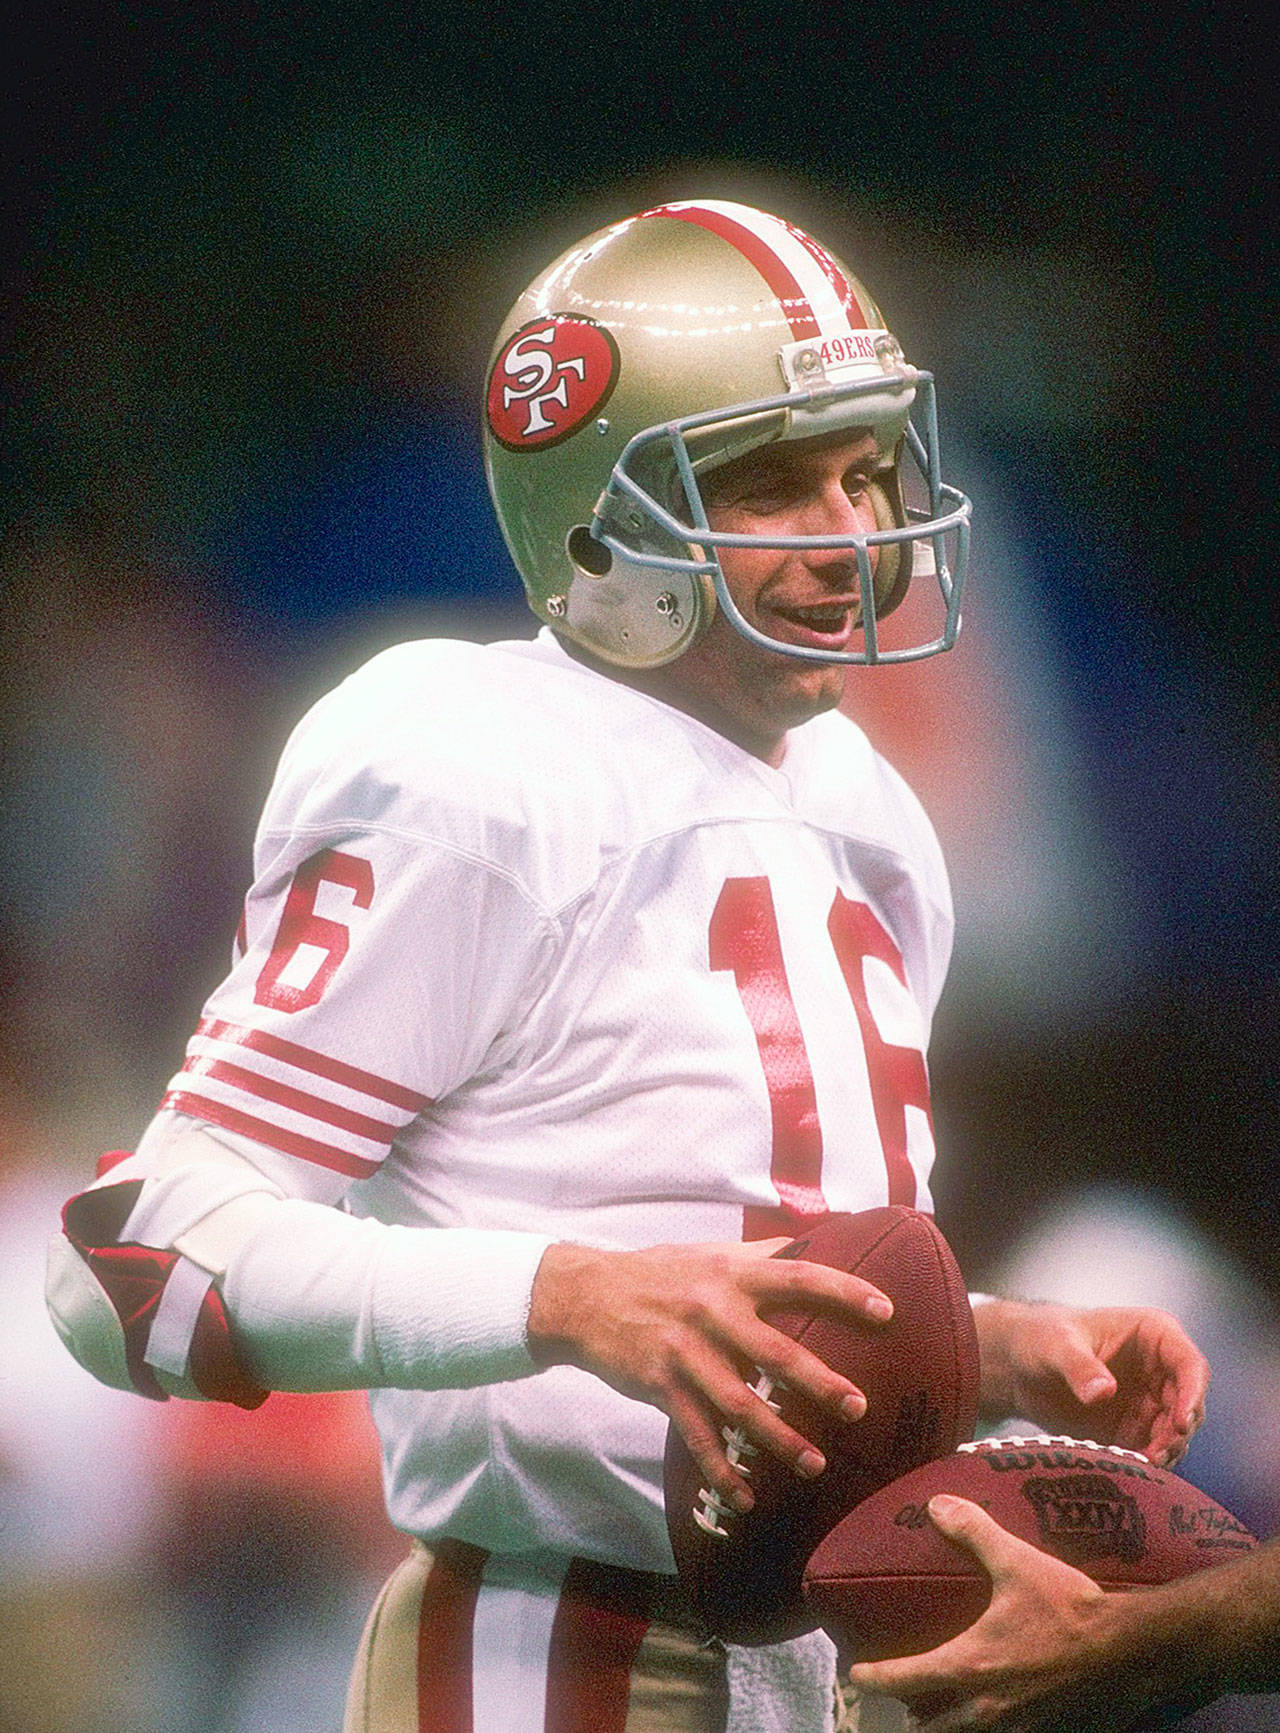 Joe Montana won all four of his Super Bowl appearances with the 49ers and posted a passer rating of at least 100 in each game. He threw 11 touchdowns and no interceptions. (Rick Stewart/Getty Images/TNS)